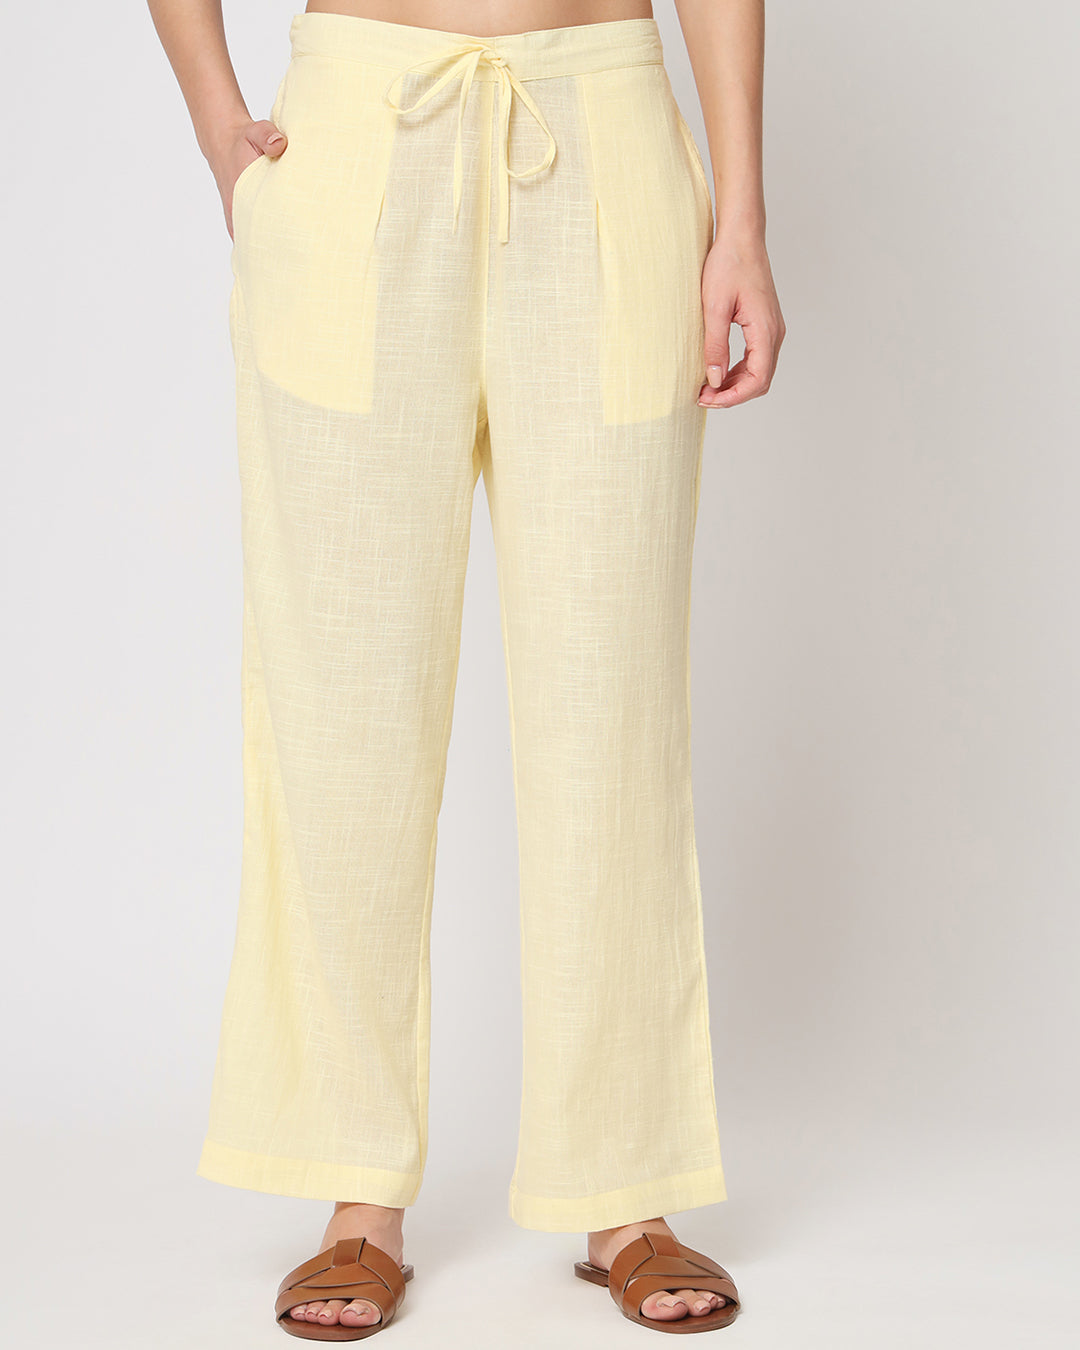 Combo: Airy Lemon & Classic Red Straight Pants- Set of 2